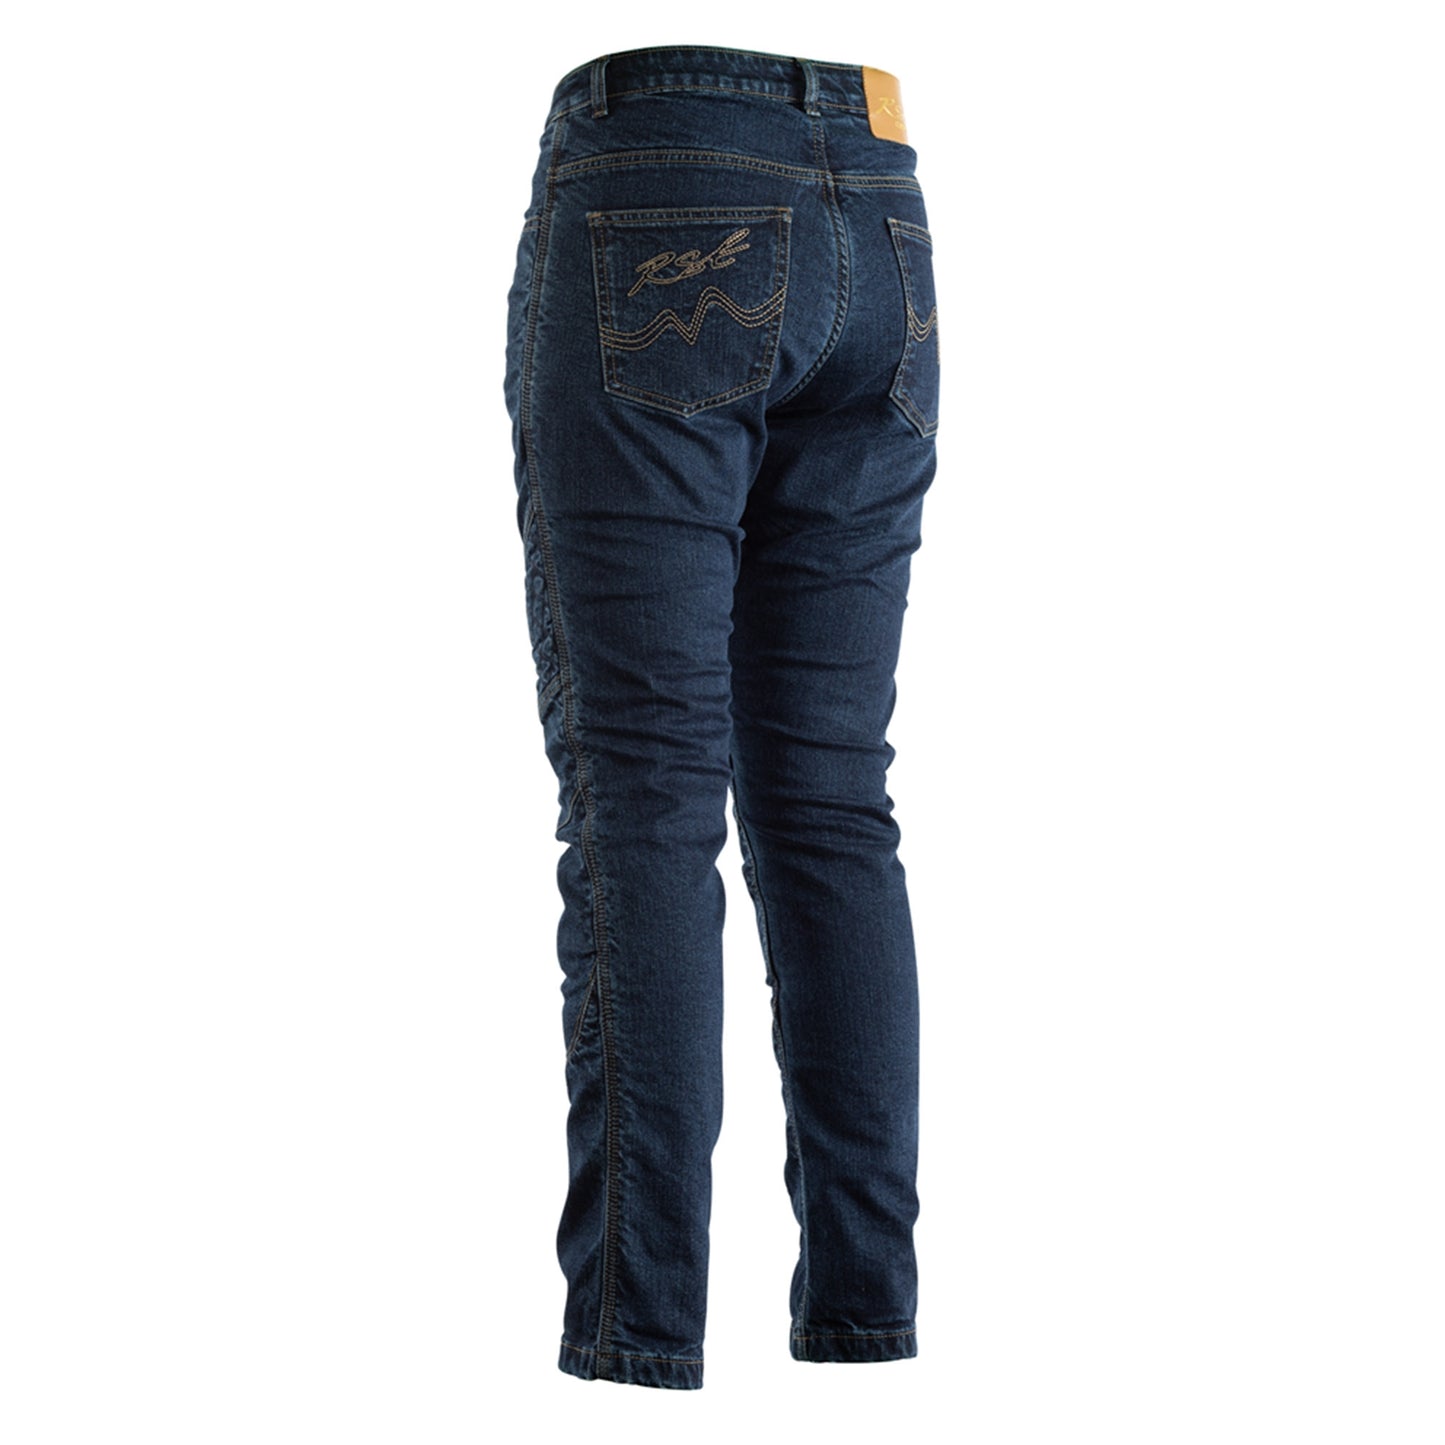 RST Reinforced Straight Leg (CE) Ladies Jeans - Includes Knee Armour - Regular Length - Blue